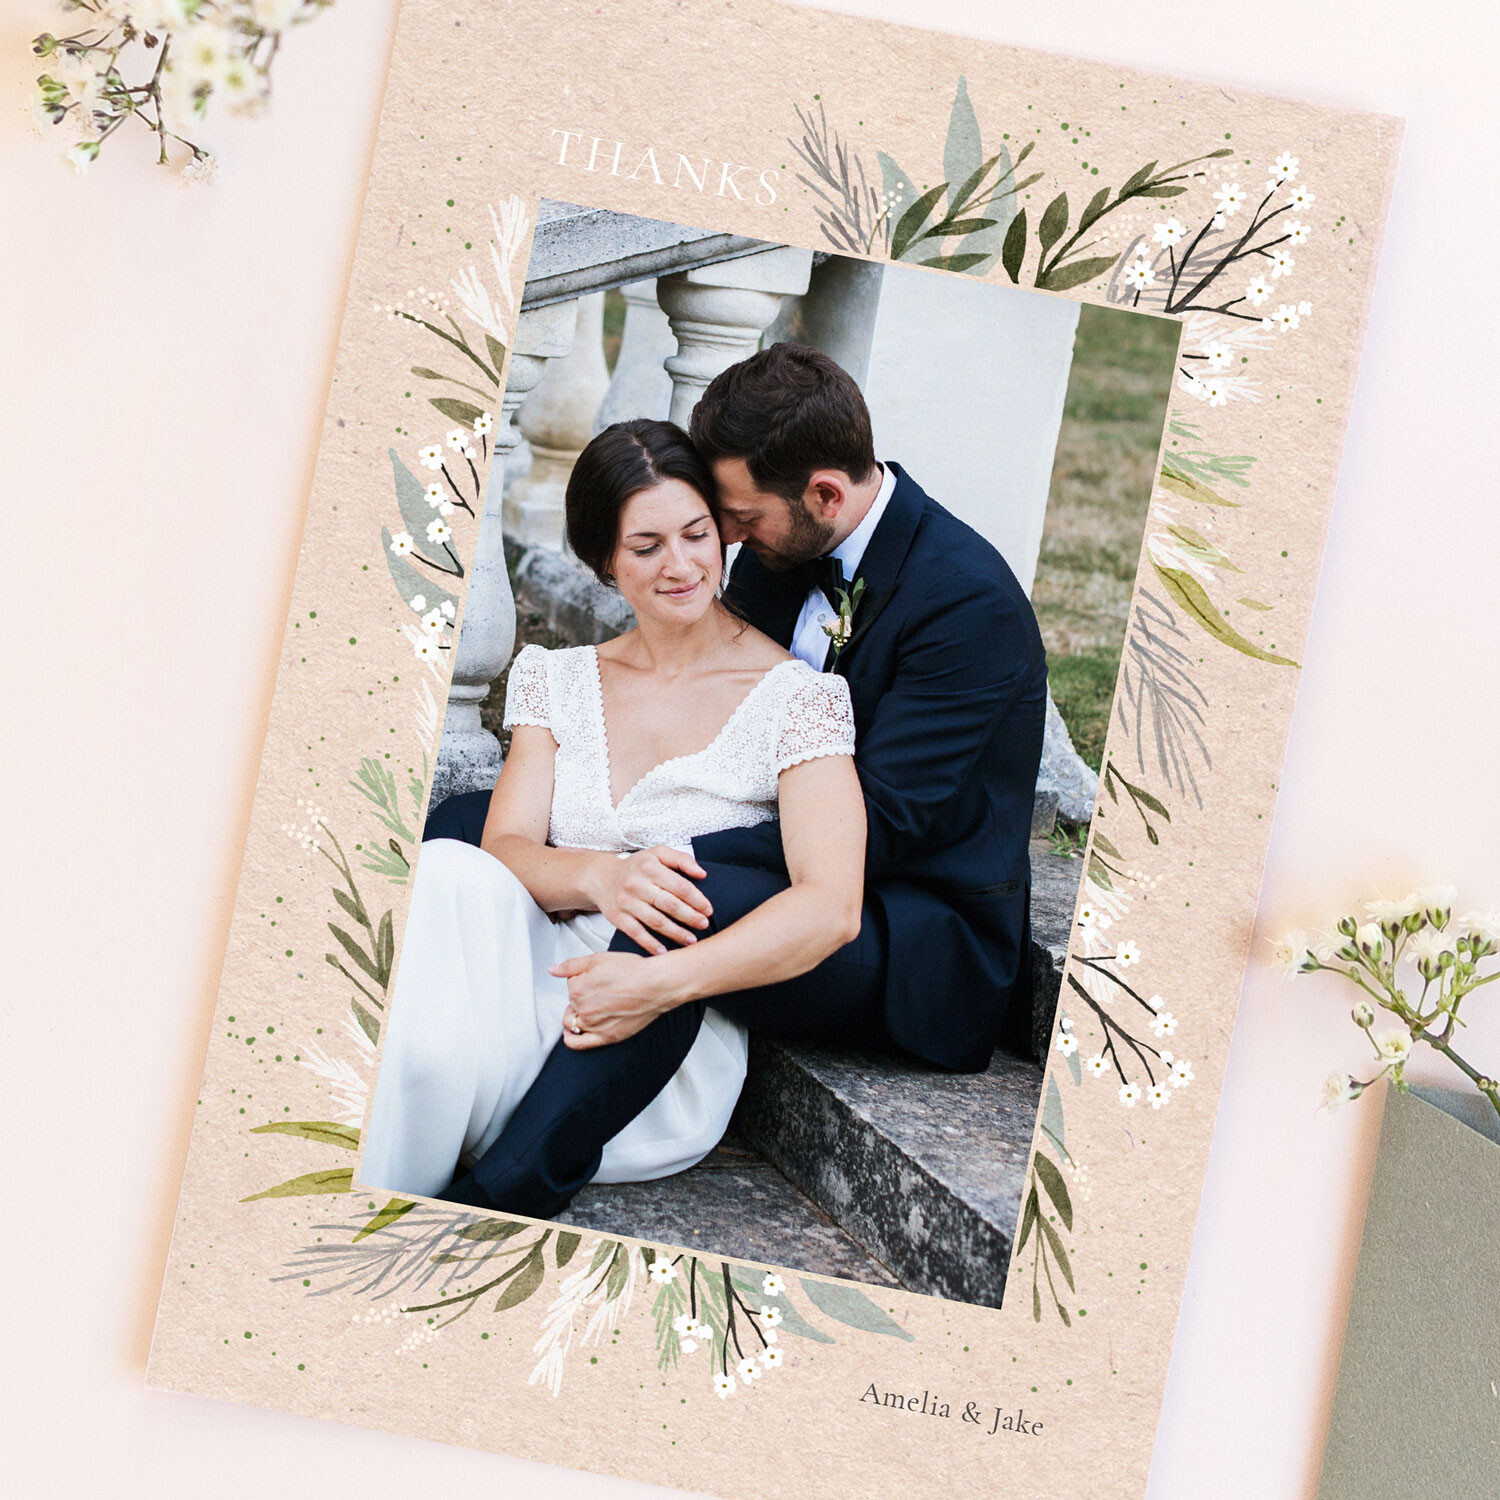 Rustic wedding thank you cards